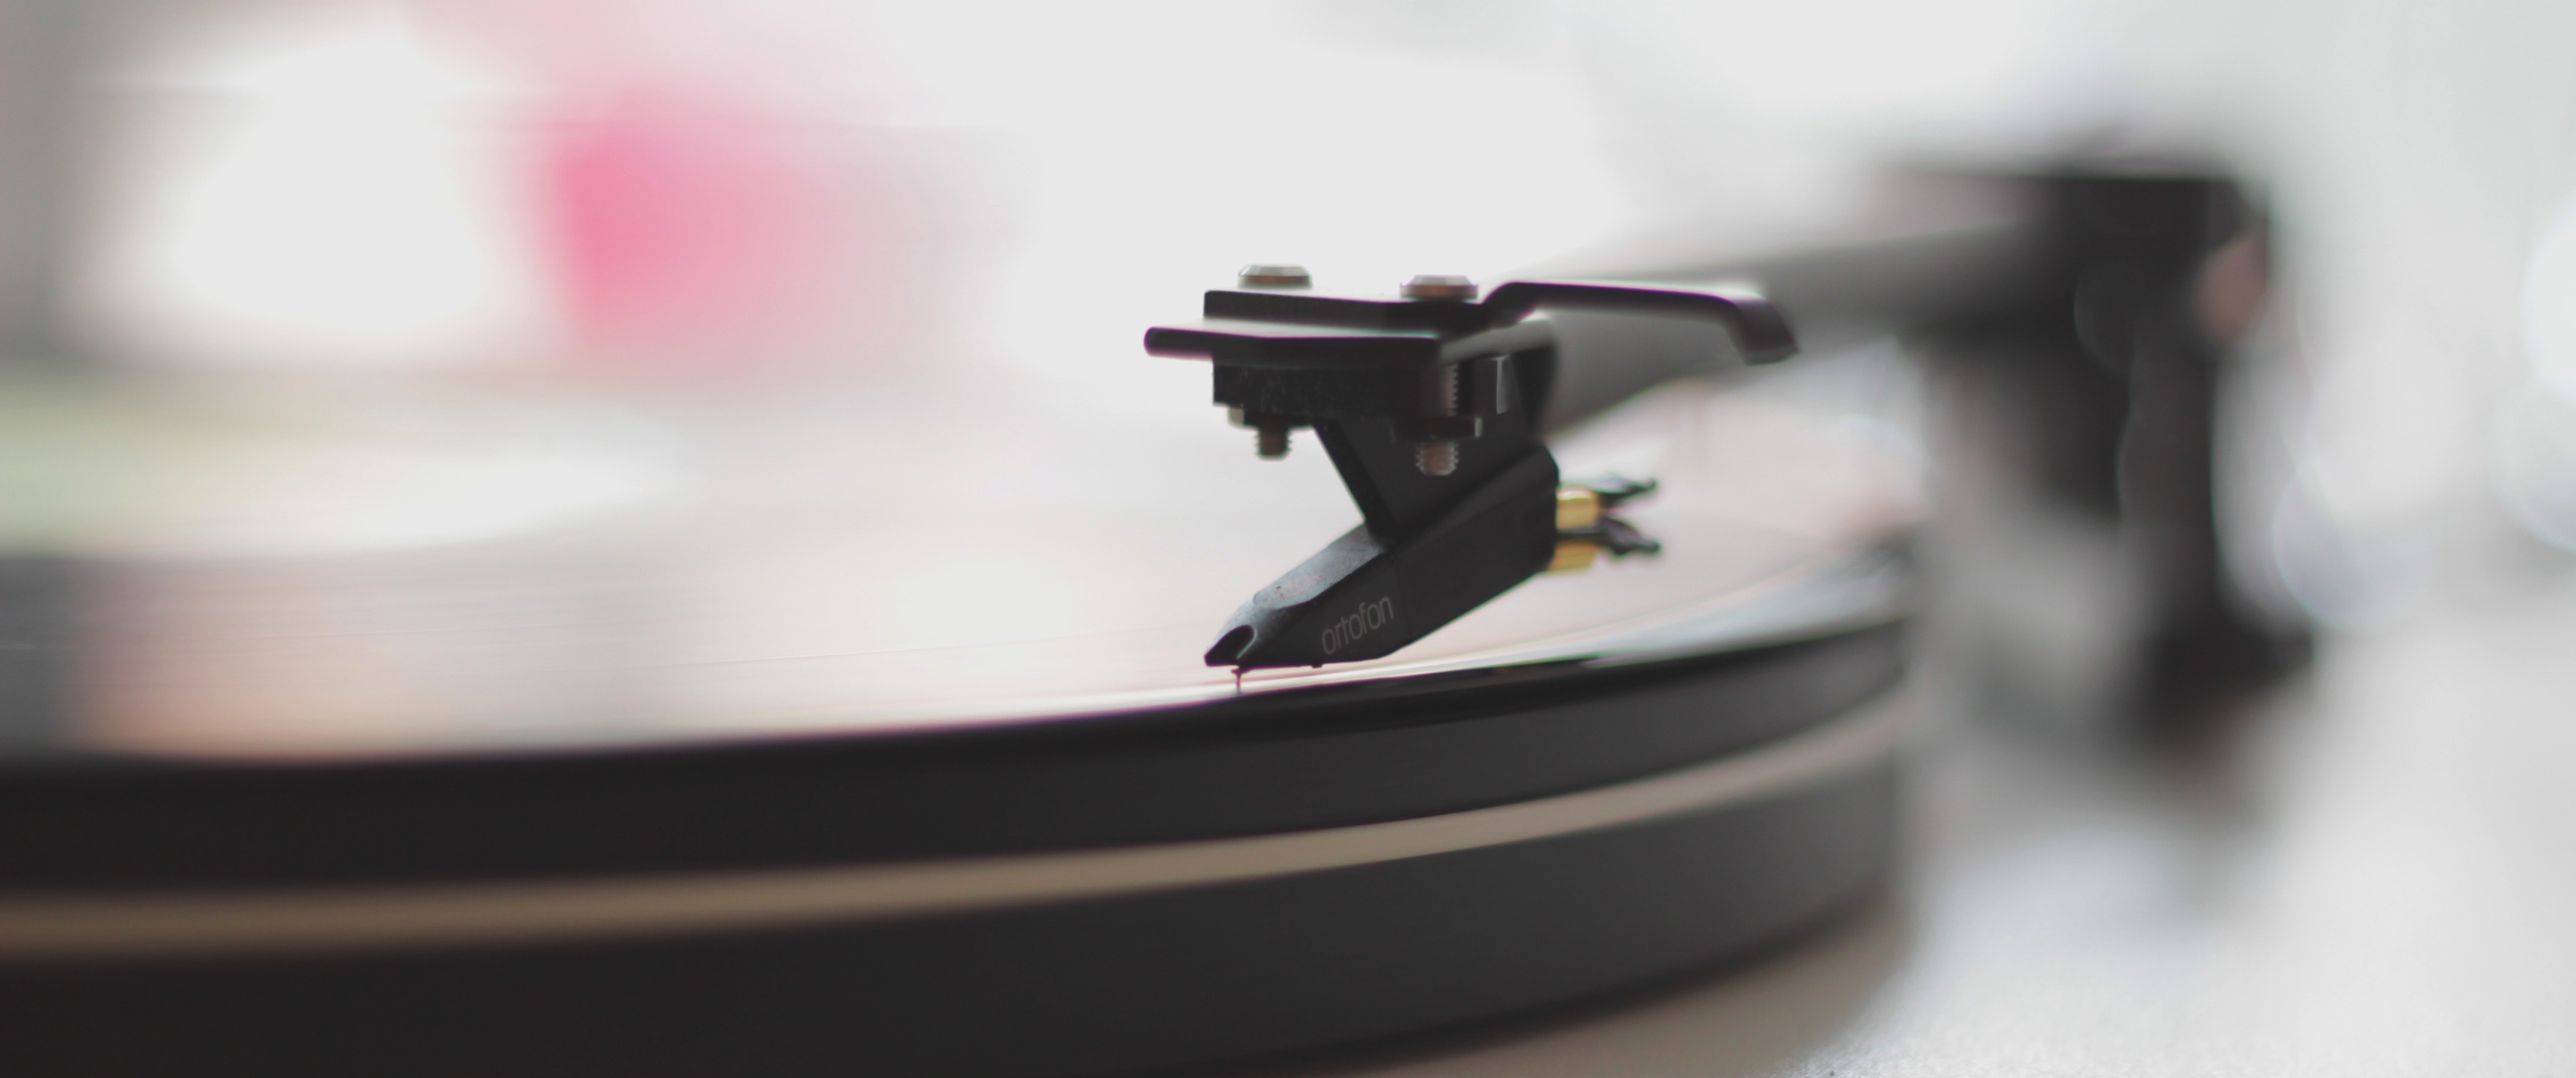 3440x1440 Vinyl Record Player 21:9 Wallpaper | Ultrawide Monitor 21:9 Wallpapers